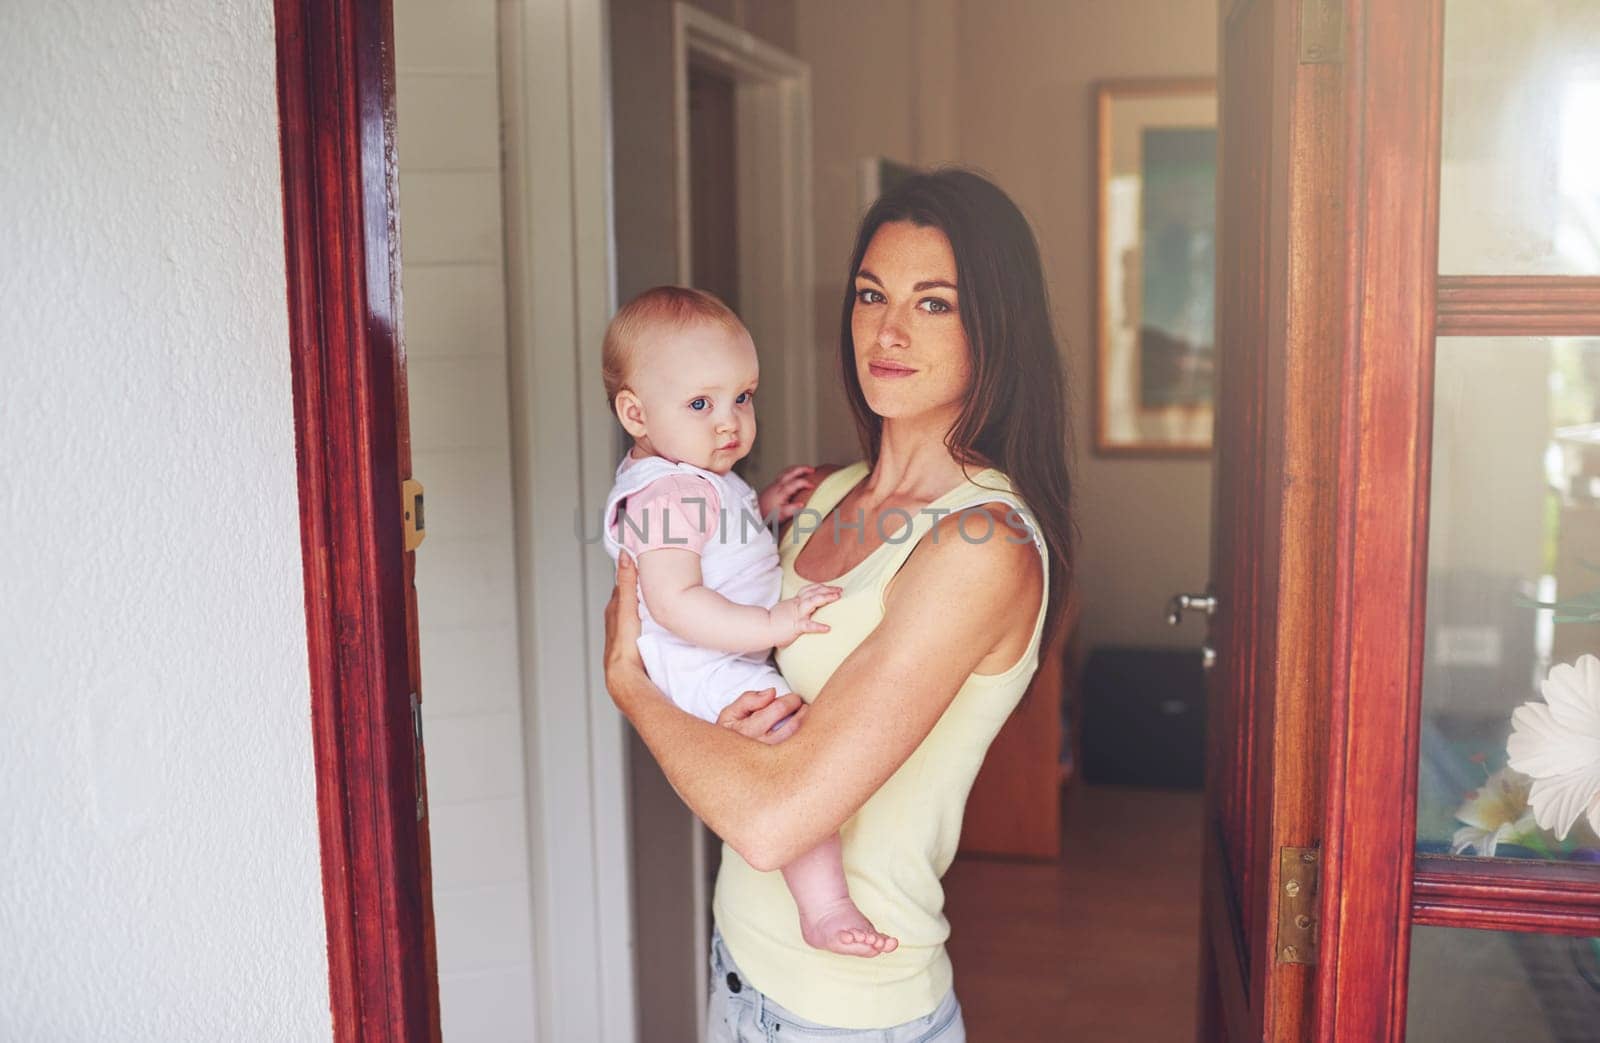 Door, home and portrait of baby with mother for bonding, parenting and relax together in house. Happy, family and mom carrying newborn infant for child development, support and love in morning.